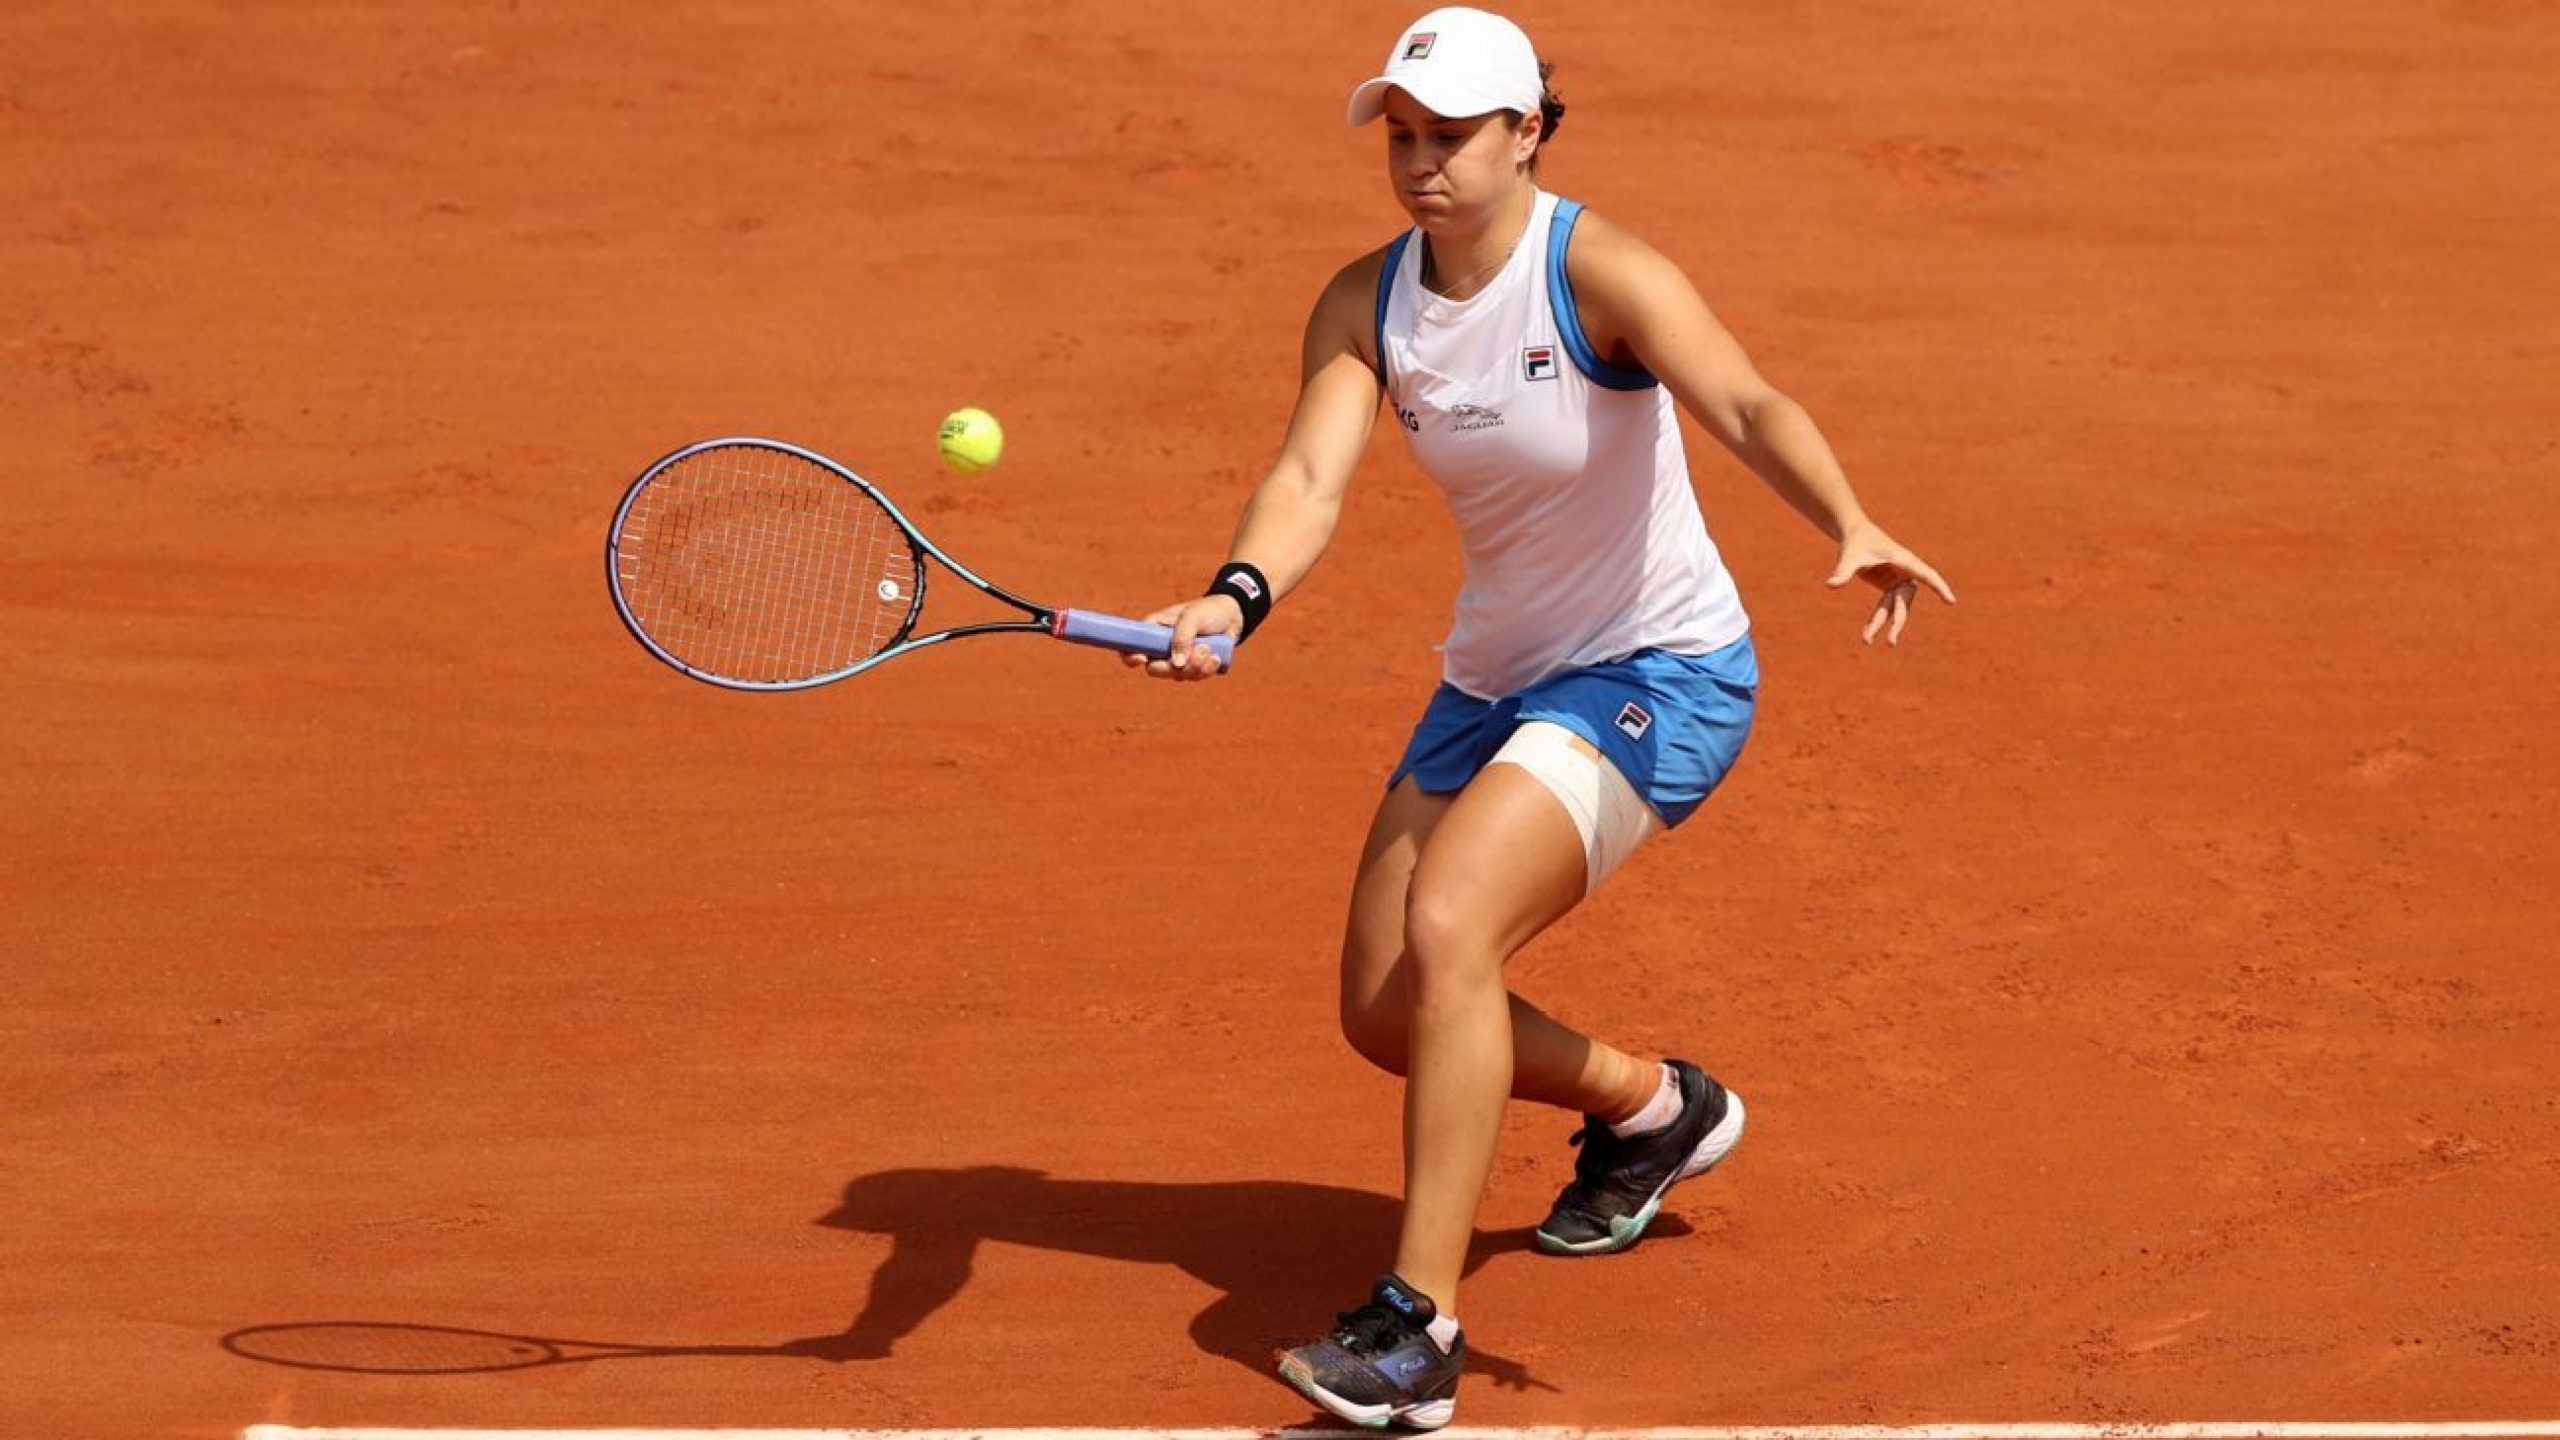 Hip injury forces No. 1 Barty to withdraw in Paris